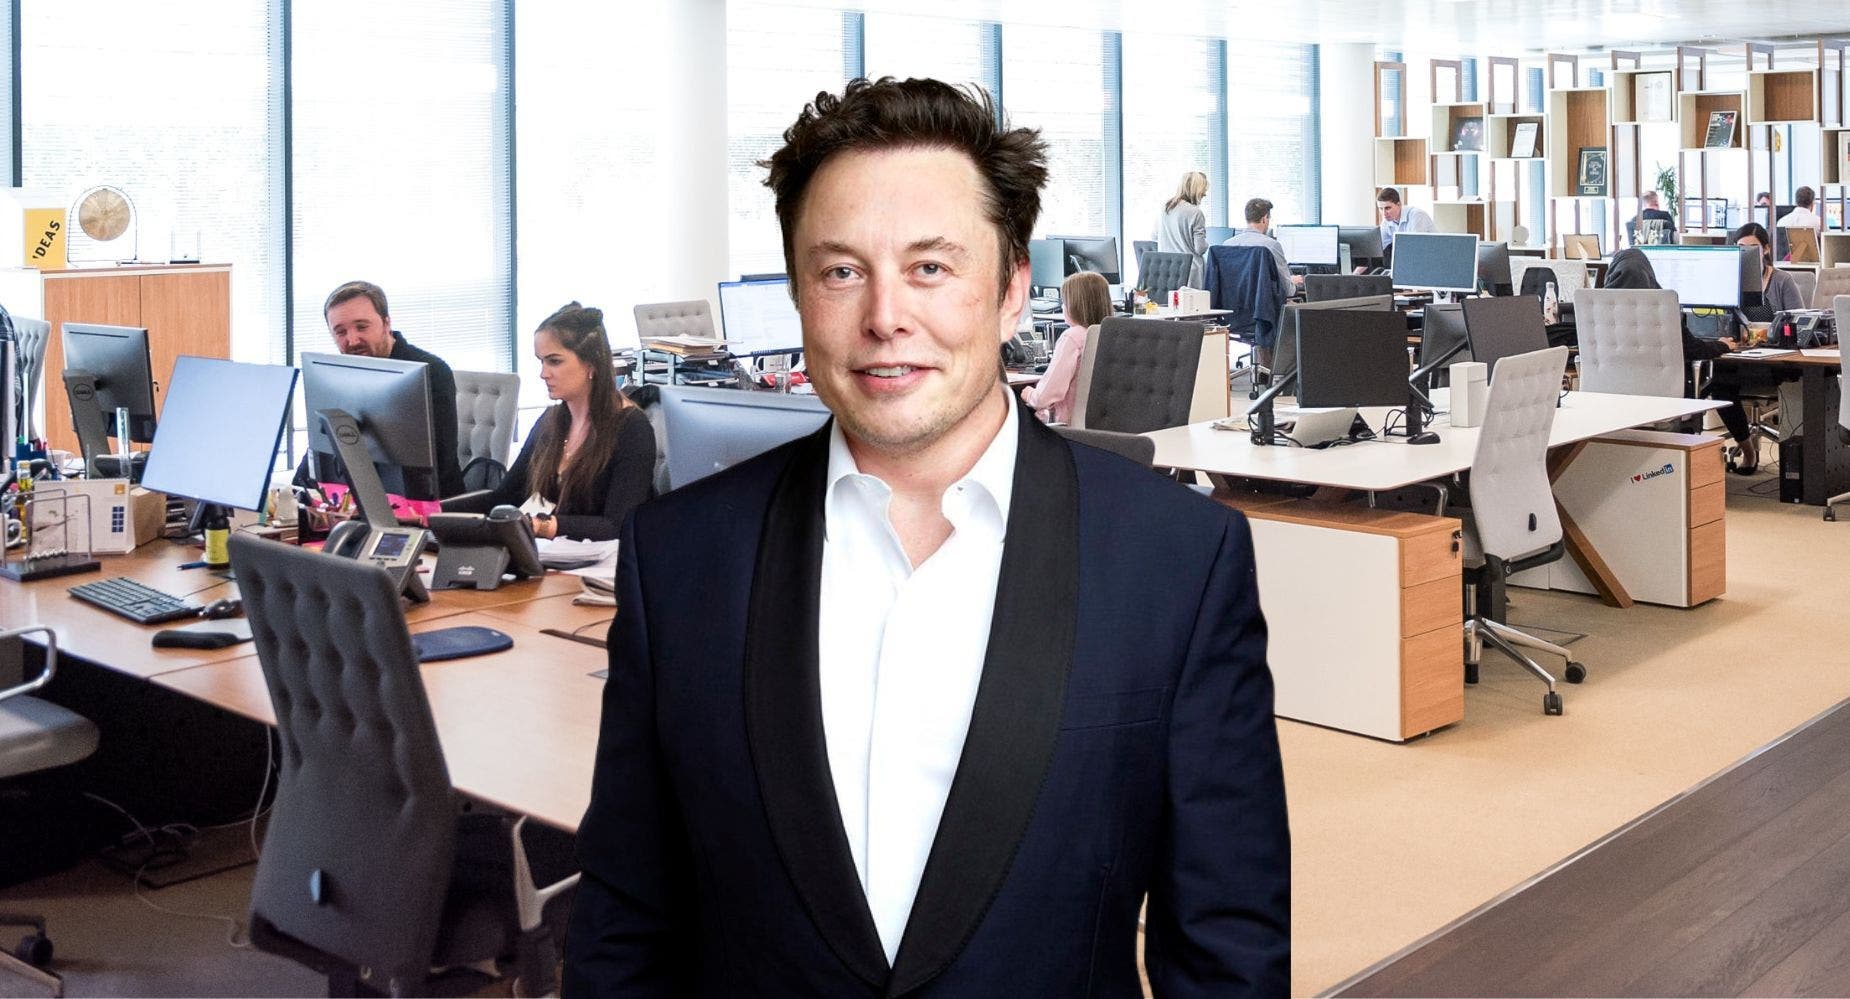 Would You Work For Elon Musk At Twitter? 69% Of Benzinga Followers Say This